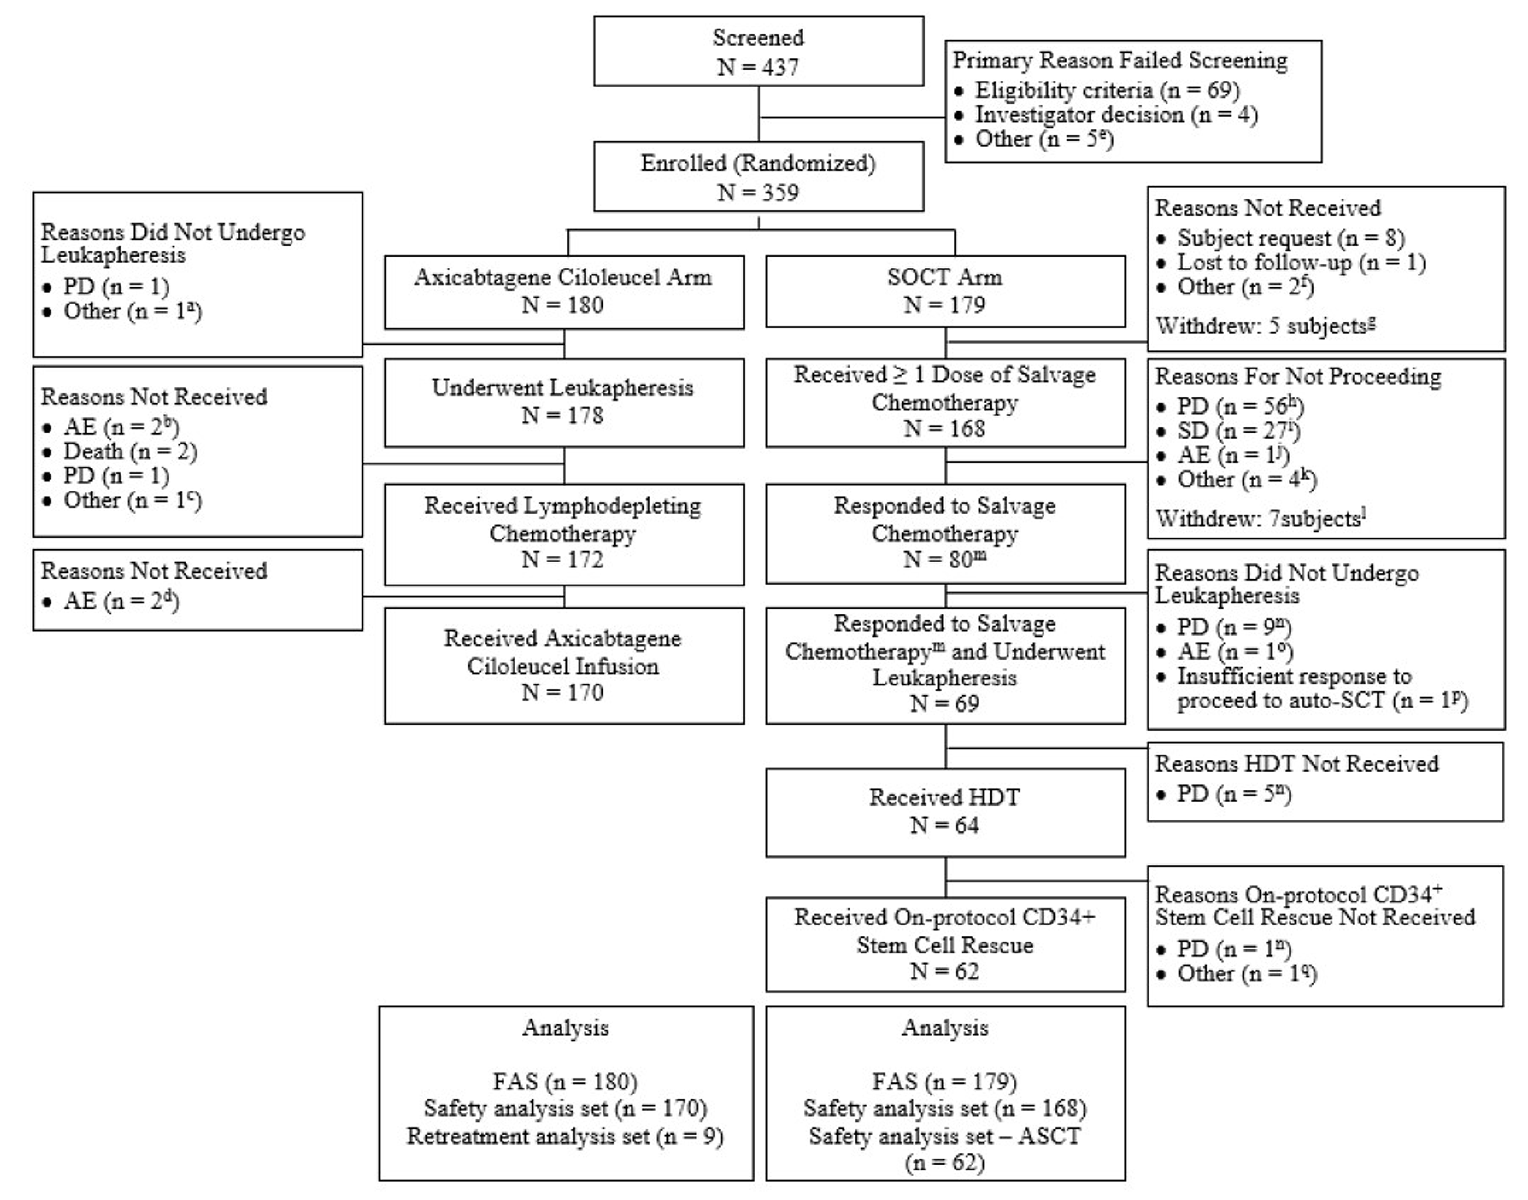 Flow diagram of patient disposition in the ZUMA-7 study. Of the 437 patients screened, 359 were randomized (180 to the axi-cel arm and 179 to the SOC arm). In the axi-cel arm 178 patients underwent leukapheresis, 172 received lymphodepleting chemotherapy, and 170 ultimately received an axi-cel infusion. In the SOC arm, 168 patients received at least 1 dose of salvage chemotherapy, of whom 80 responded to salvage chemotherapy. Of these patients, 69 underwent leukapheresis, of whom 62 received on-protocol CD34+ stem cell rescue.